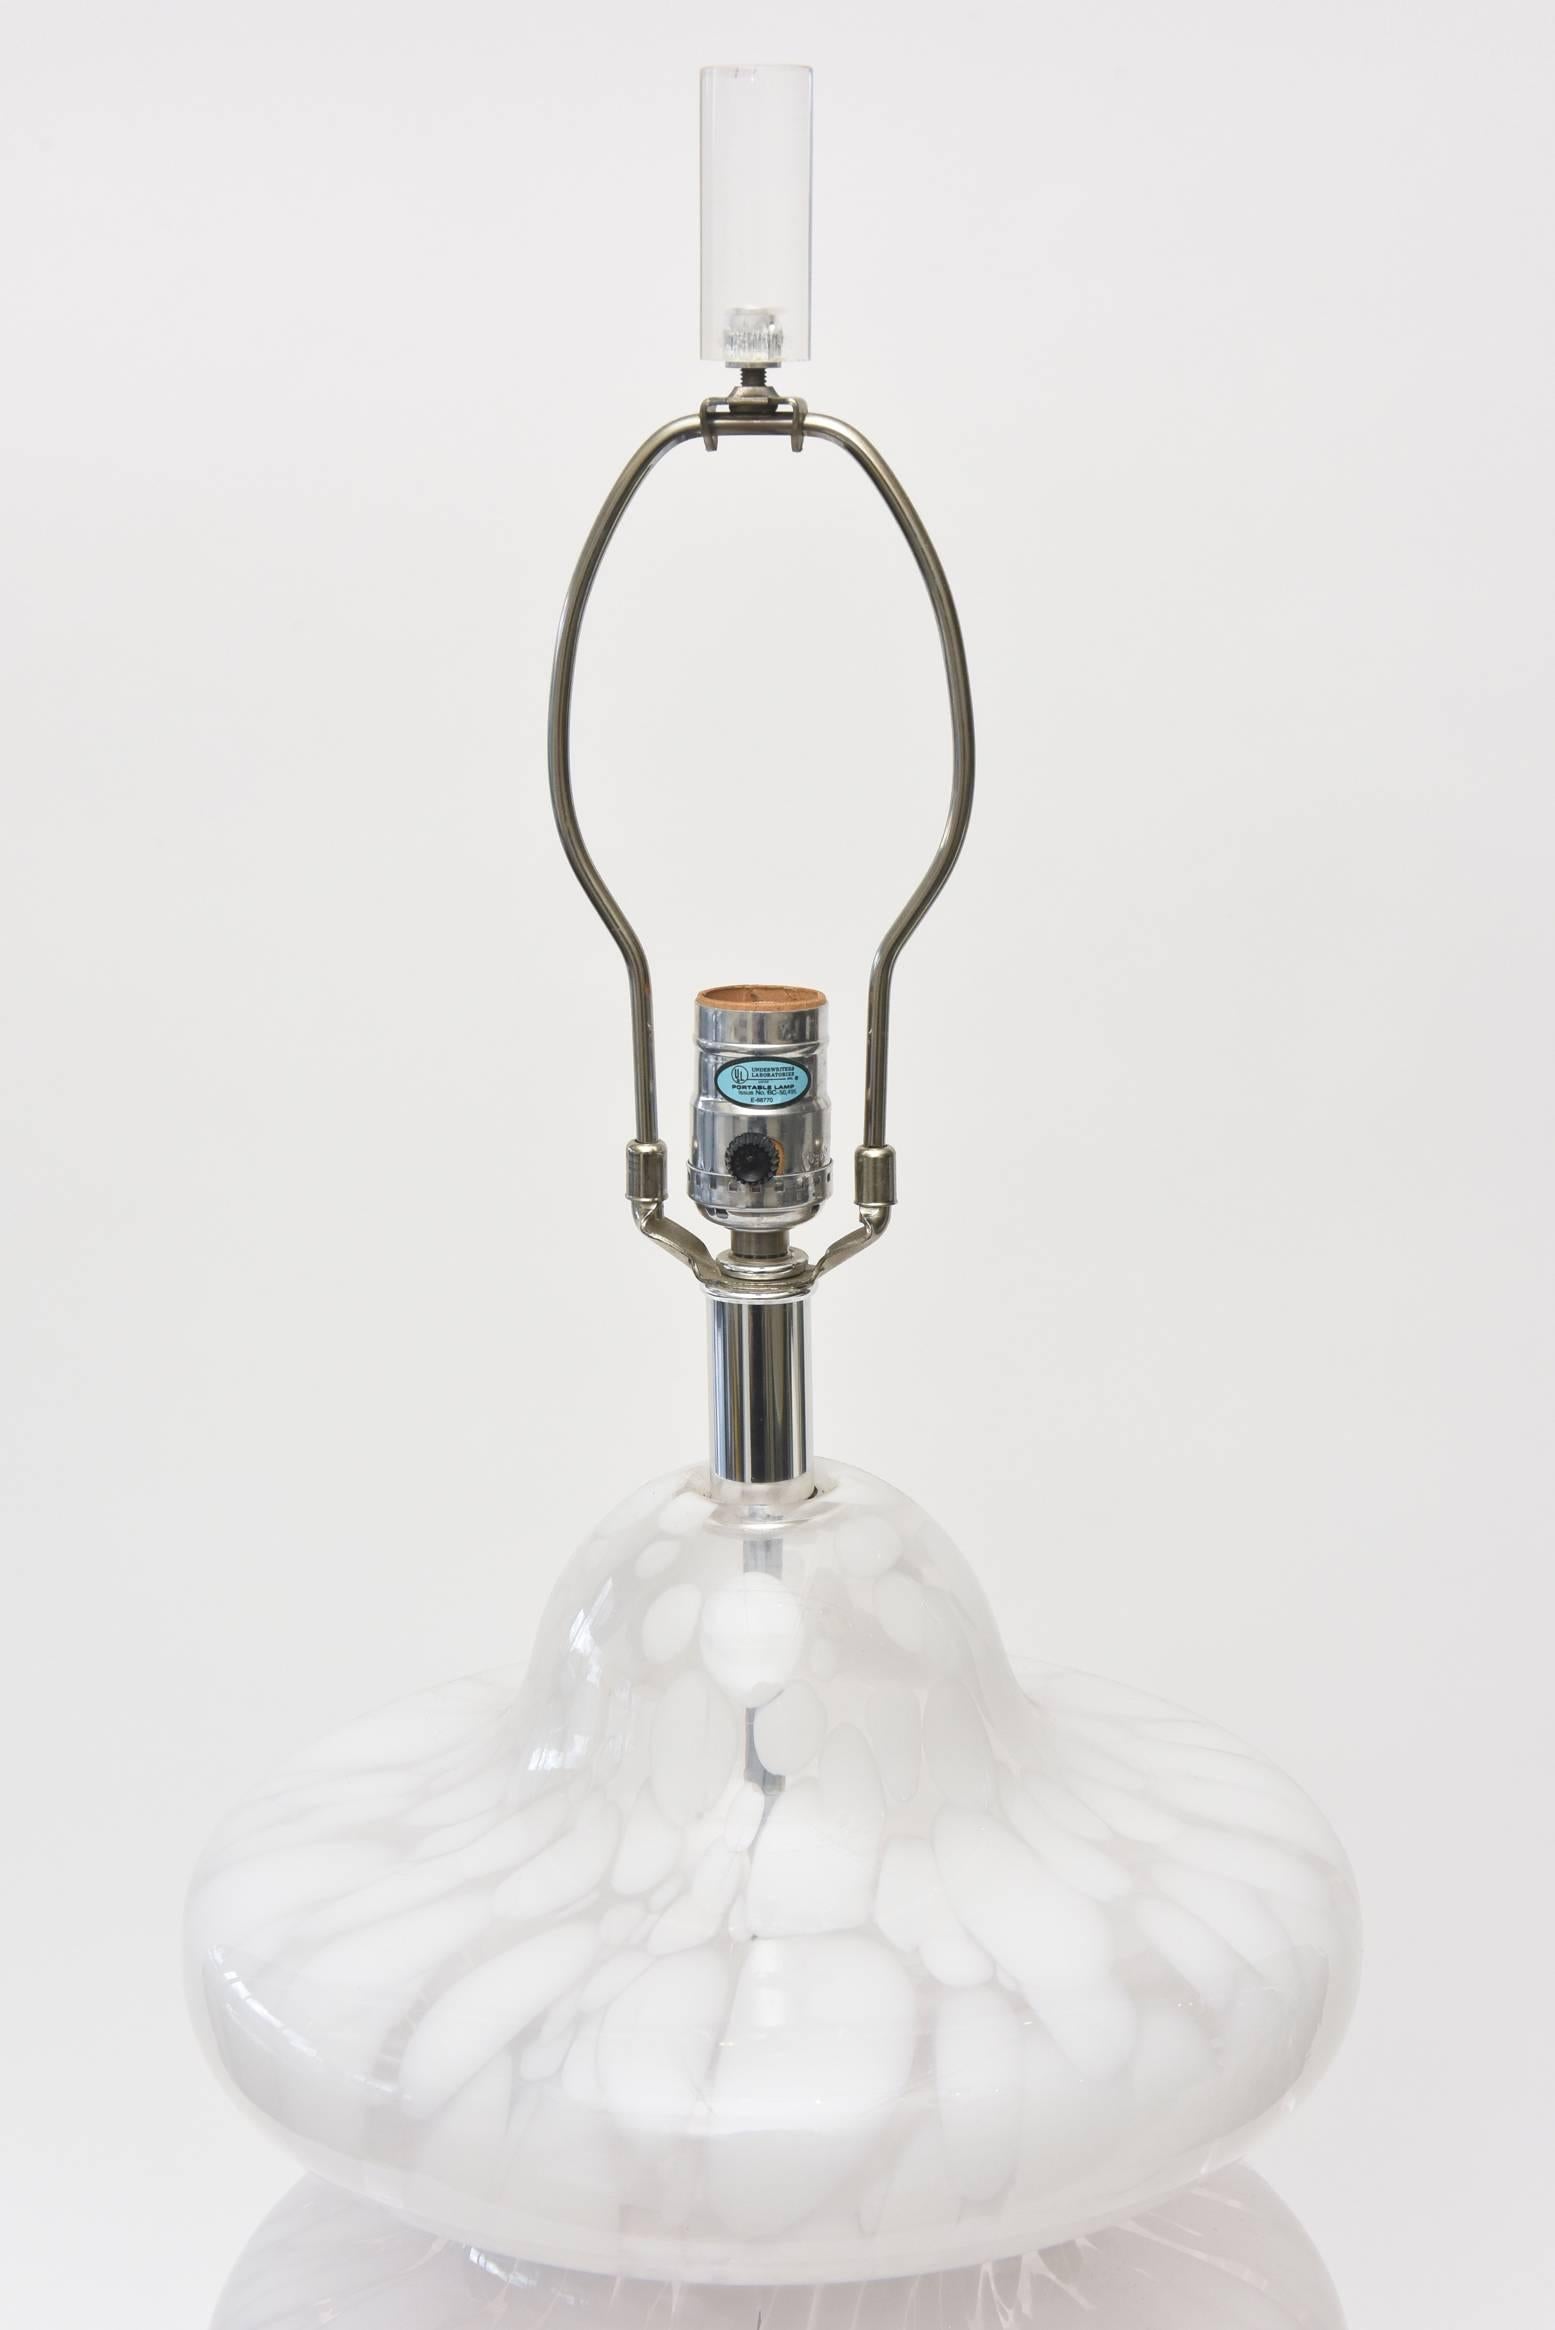 This beautiful Italian vintage Murano Carlo Nason for Mazzega four-tier pagoda style glass desk or table lamp sits on a lucite round base and has a an original lucite finial. The white swirls of glass sit admidst clear glass giving an abstract